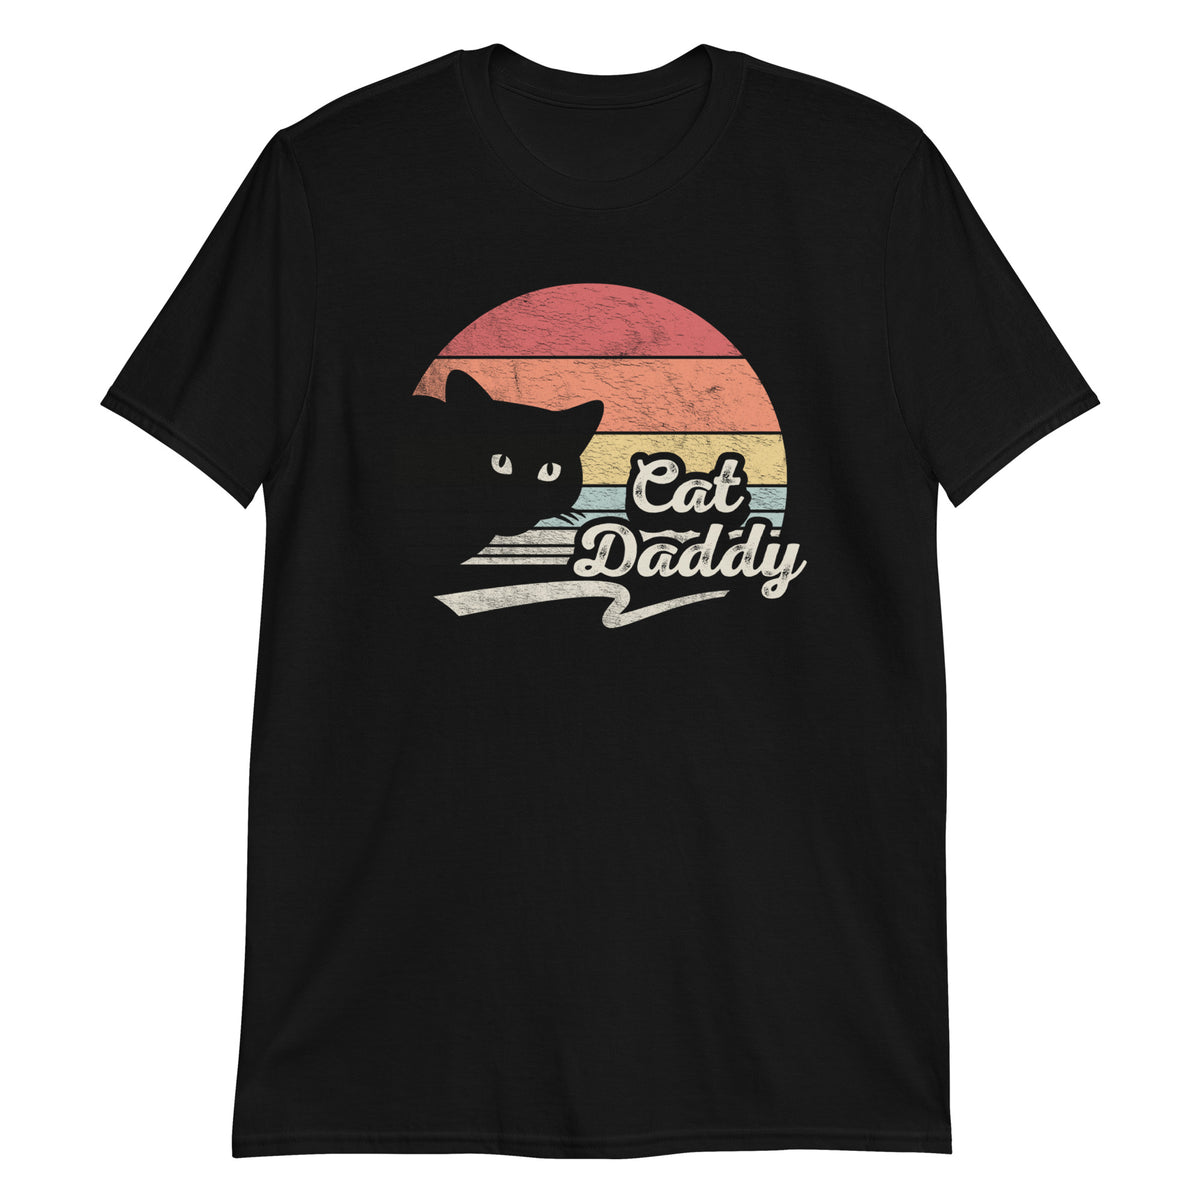 Cat Daddy Sunset Retro Vintage Funny T-Shirt